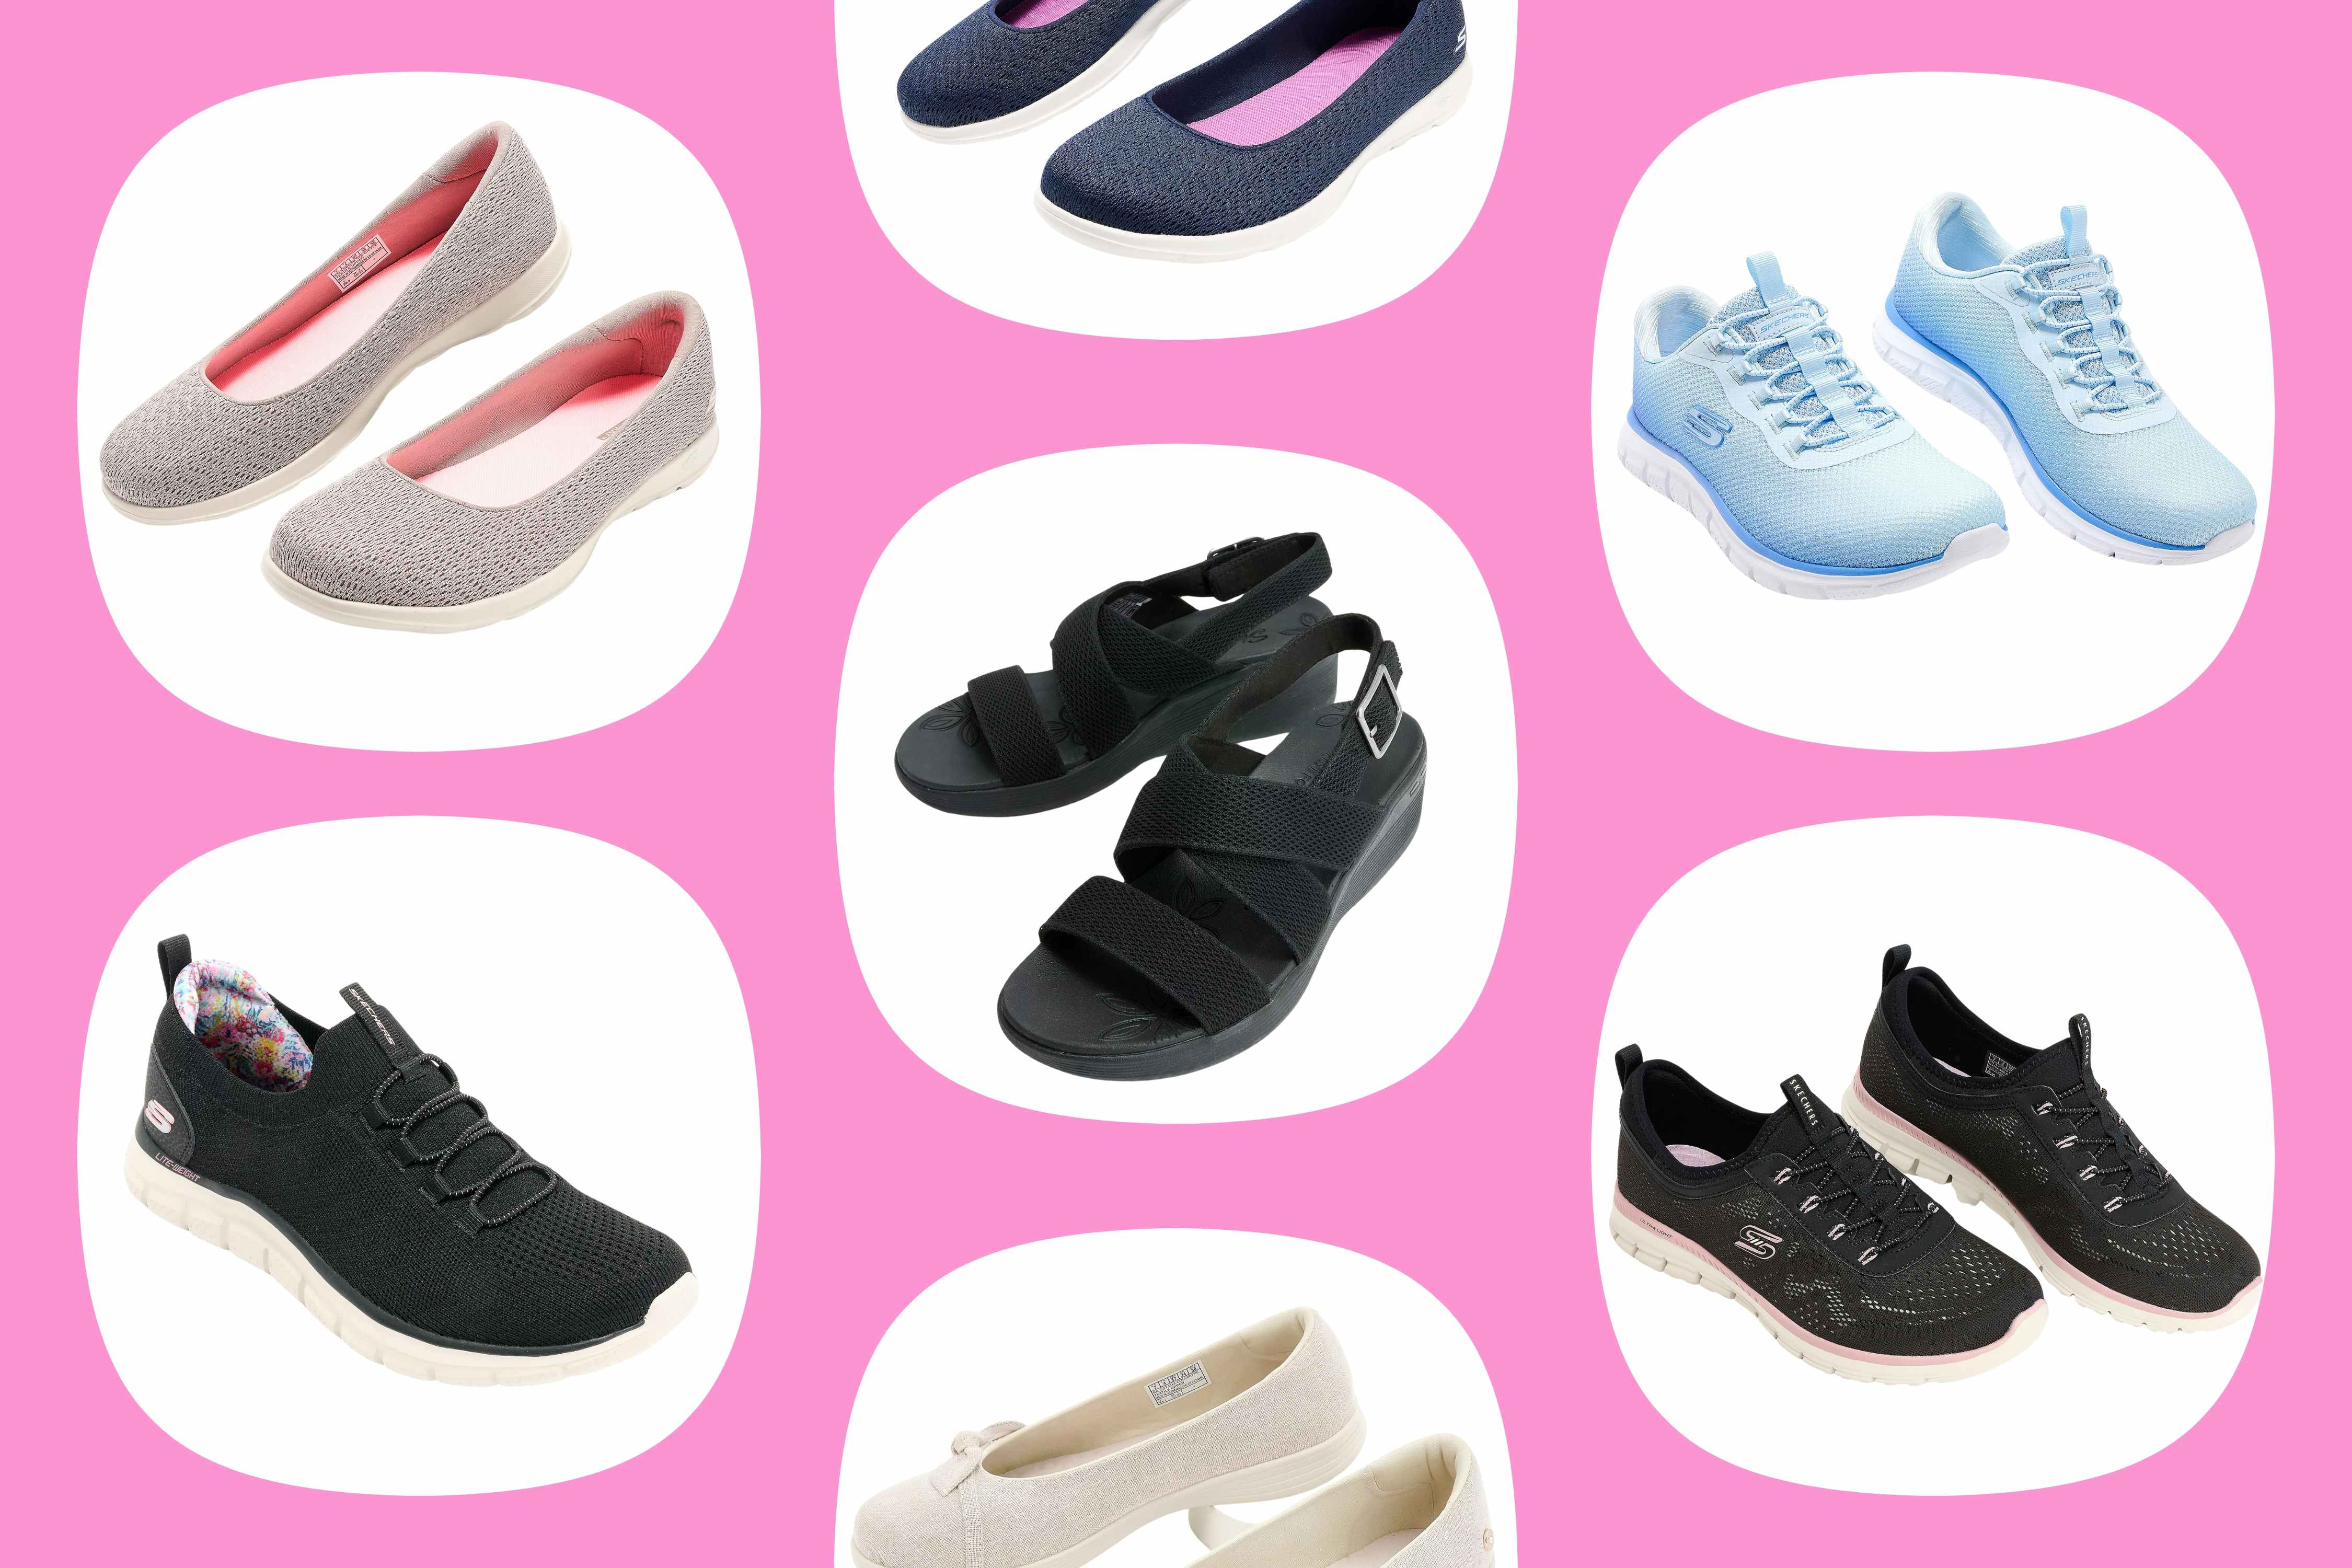 Skechers Shoes on Sale at QVC — Pairs as Low as $30